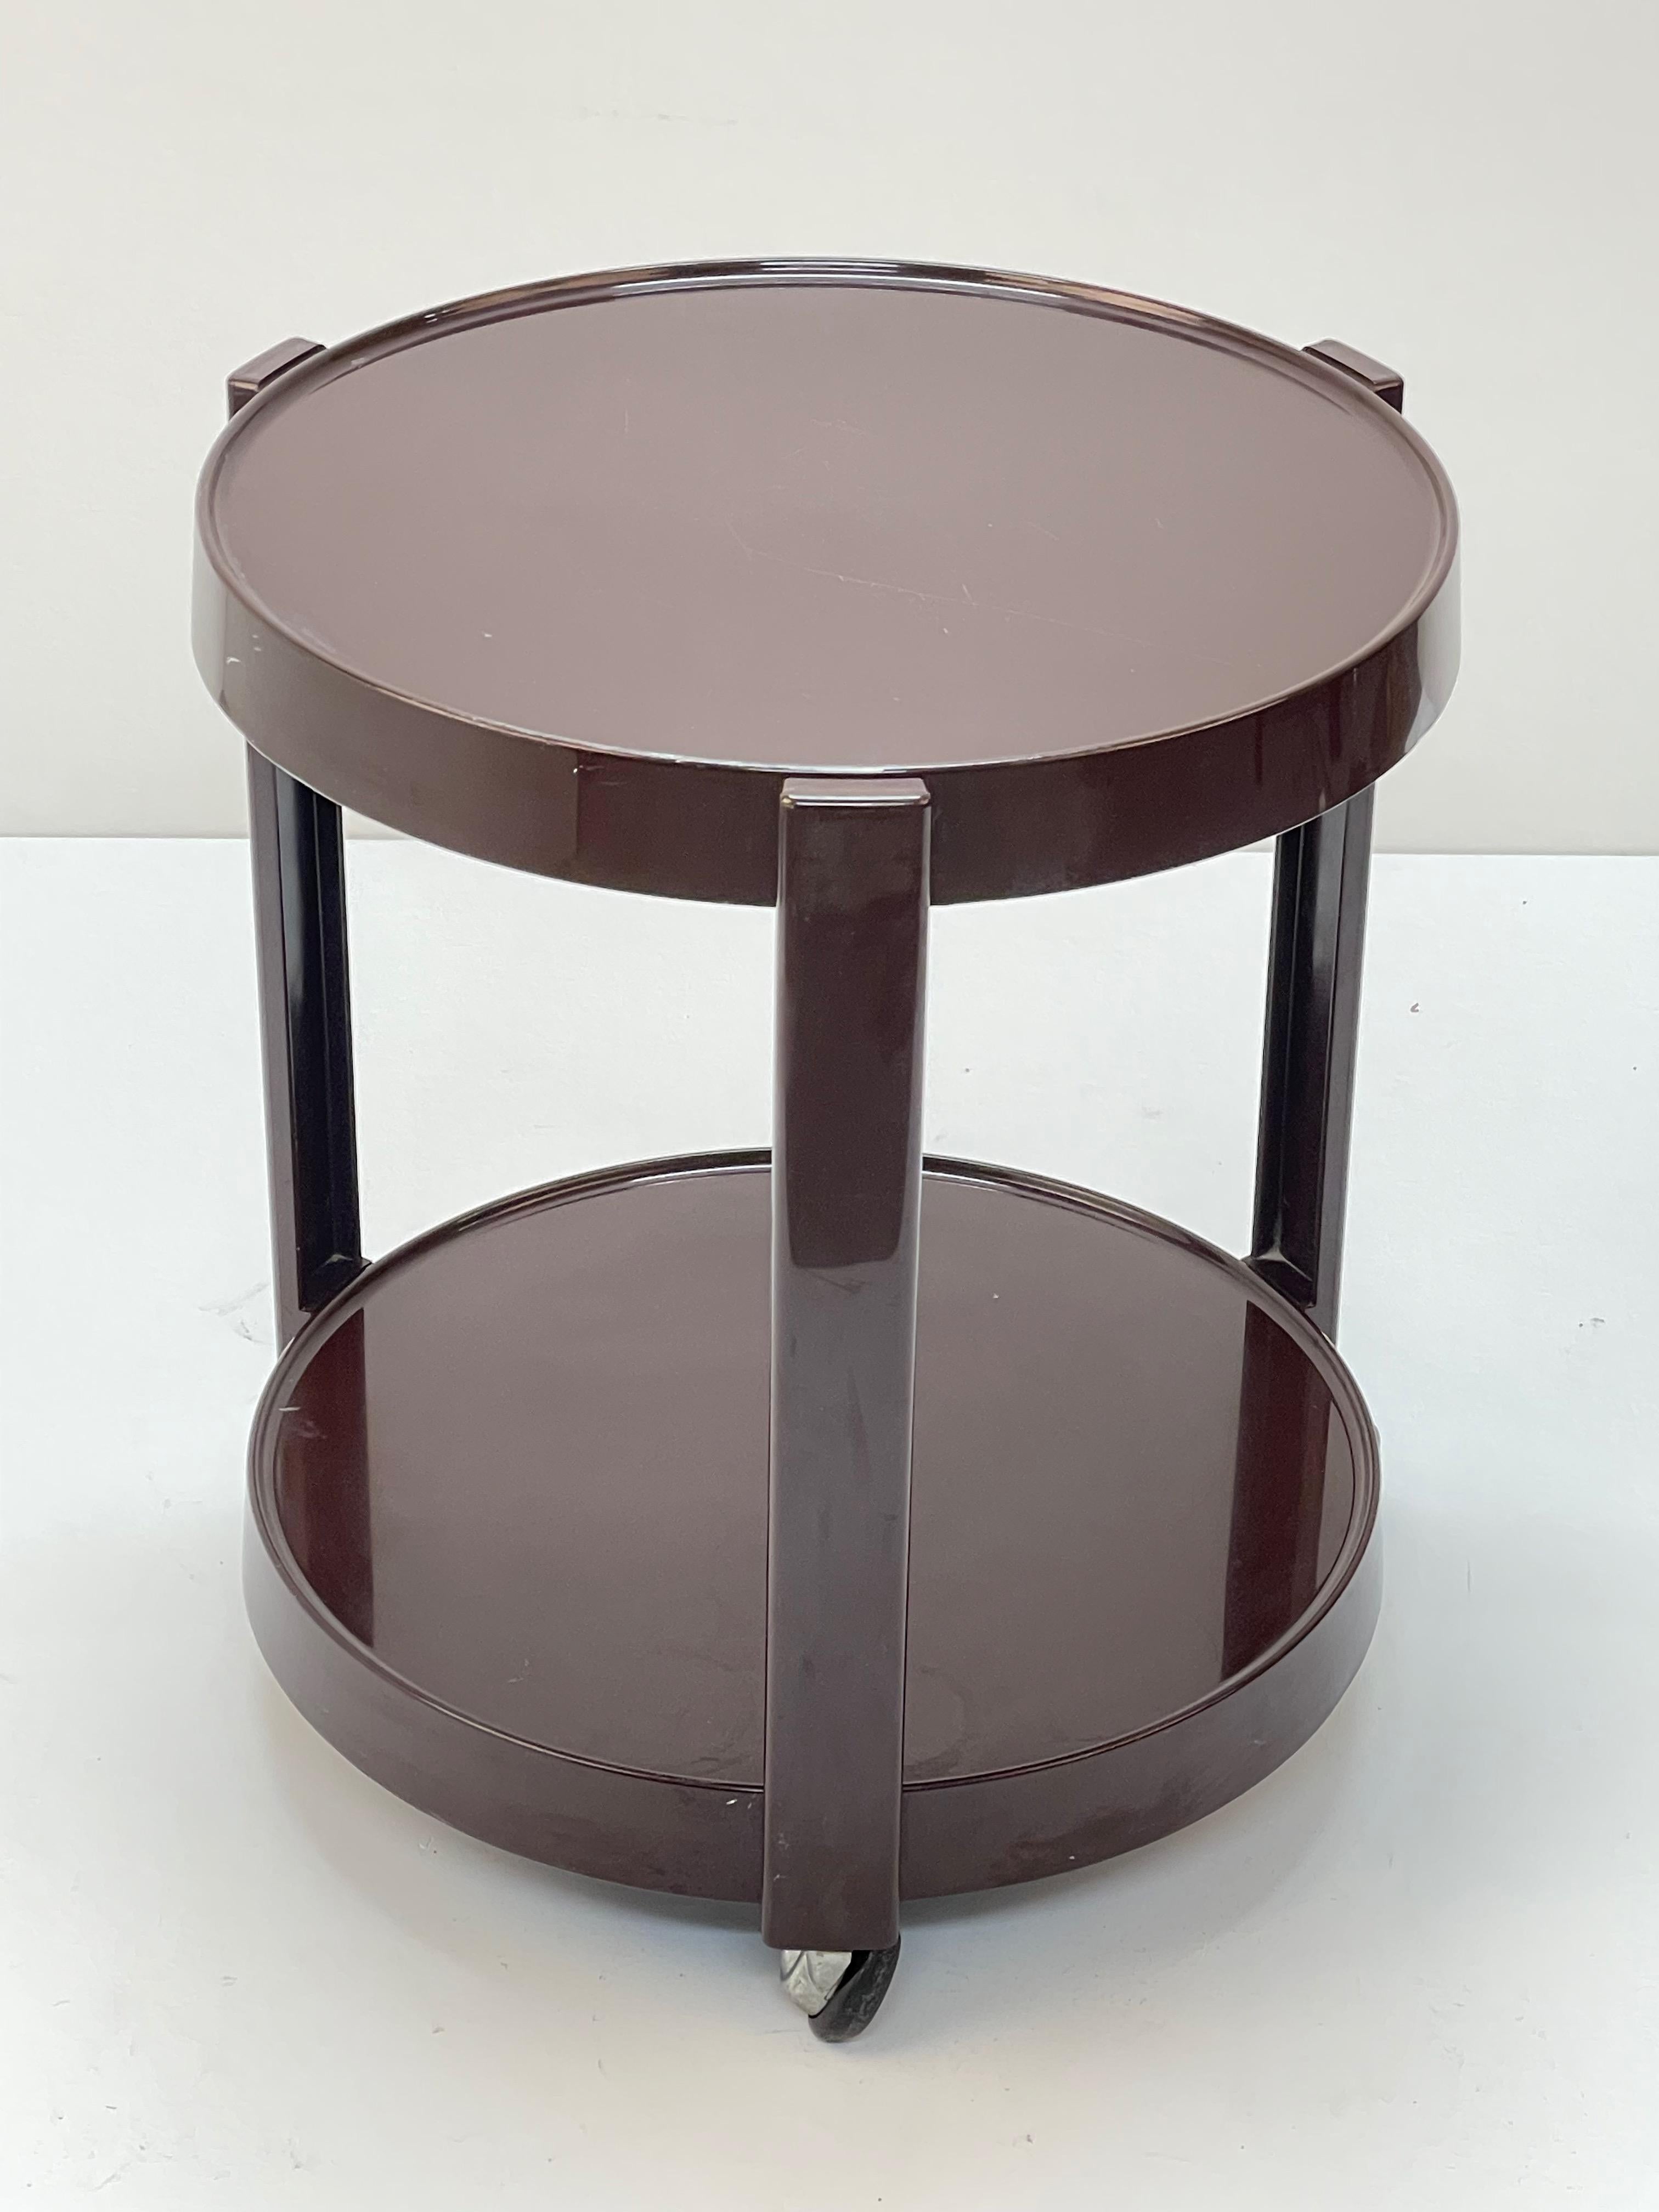 Midcentury Brown Plastic Round Italian Bar Cart with Two Shelves, 1970s For Sale 6